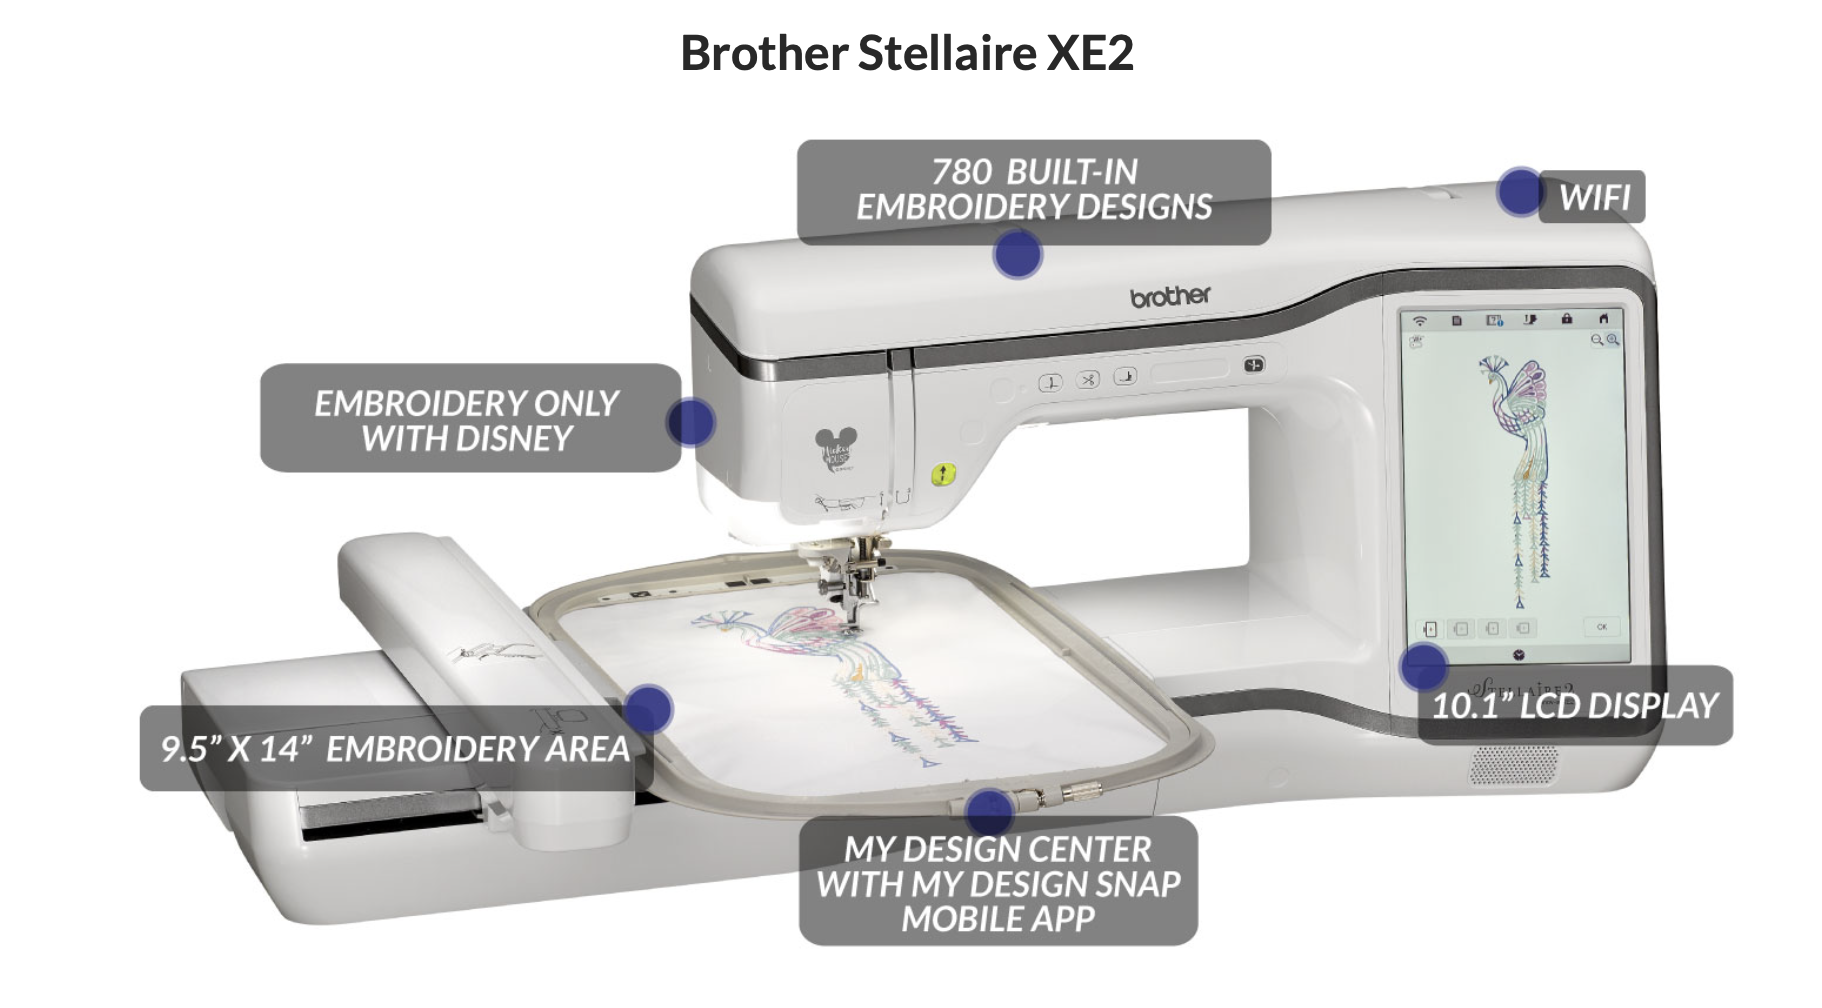 BROTHER STELLAIRE XE2 - Stellaire 2, BROTHER borduurmachine